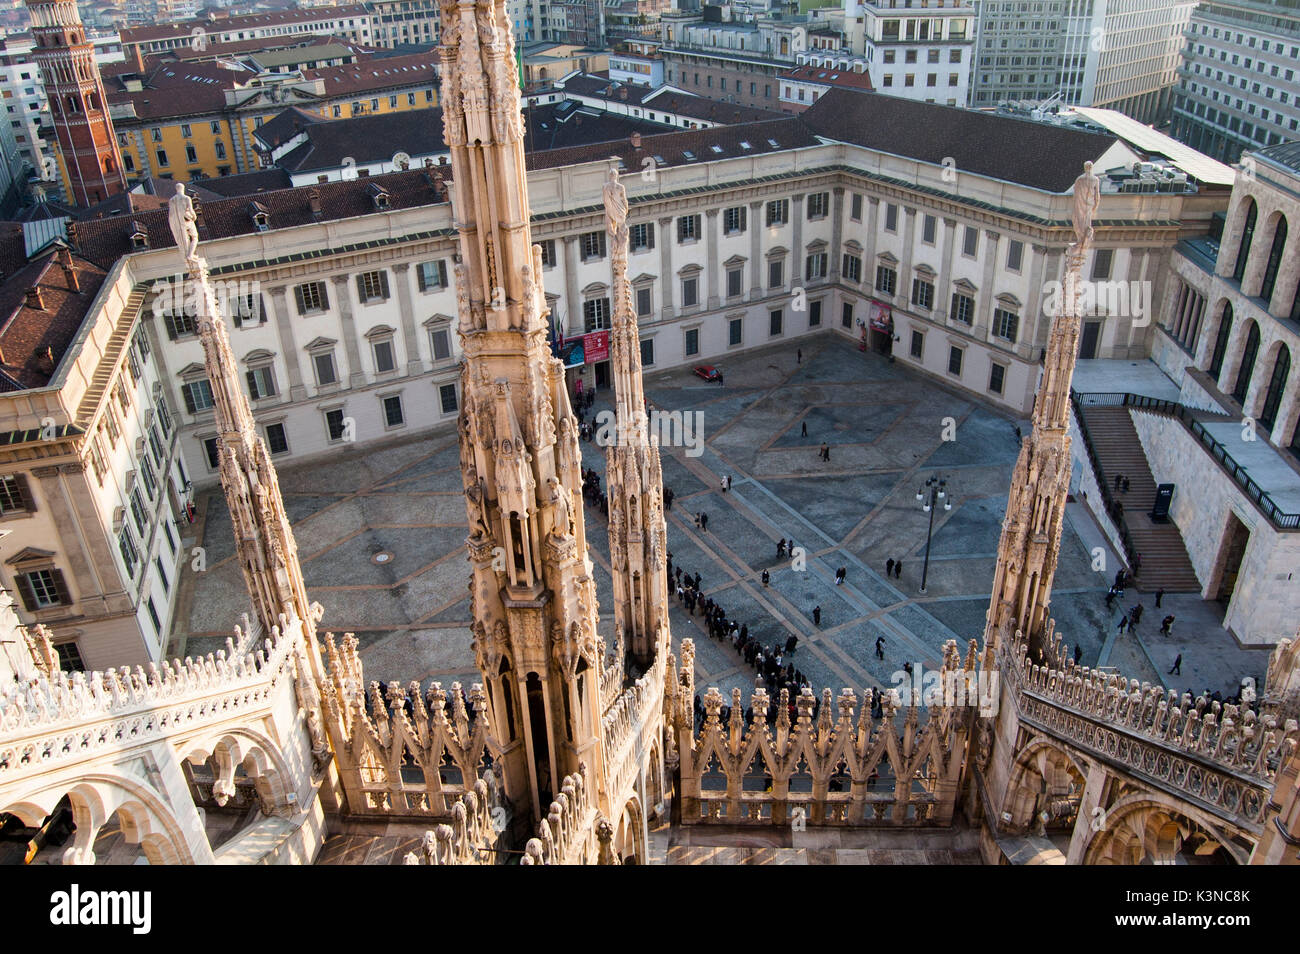 A view of Palazzo Reale from the Duomo's roof (Milan, Lombardy, Italy) Stock Photo